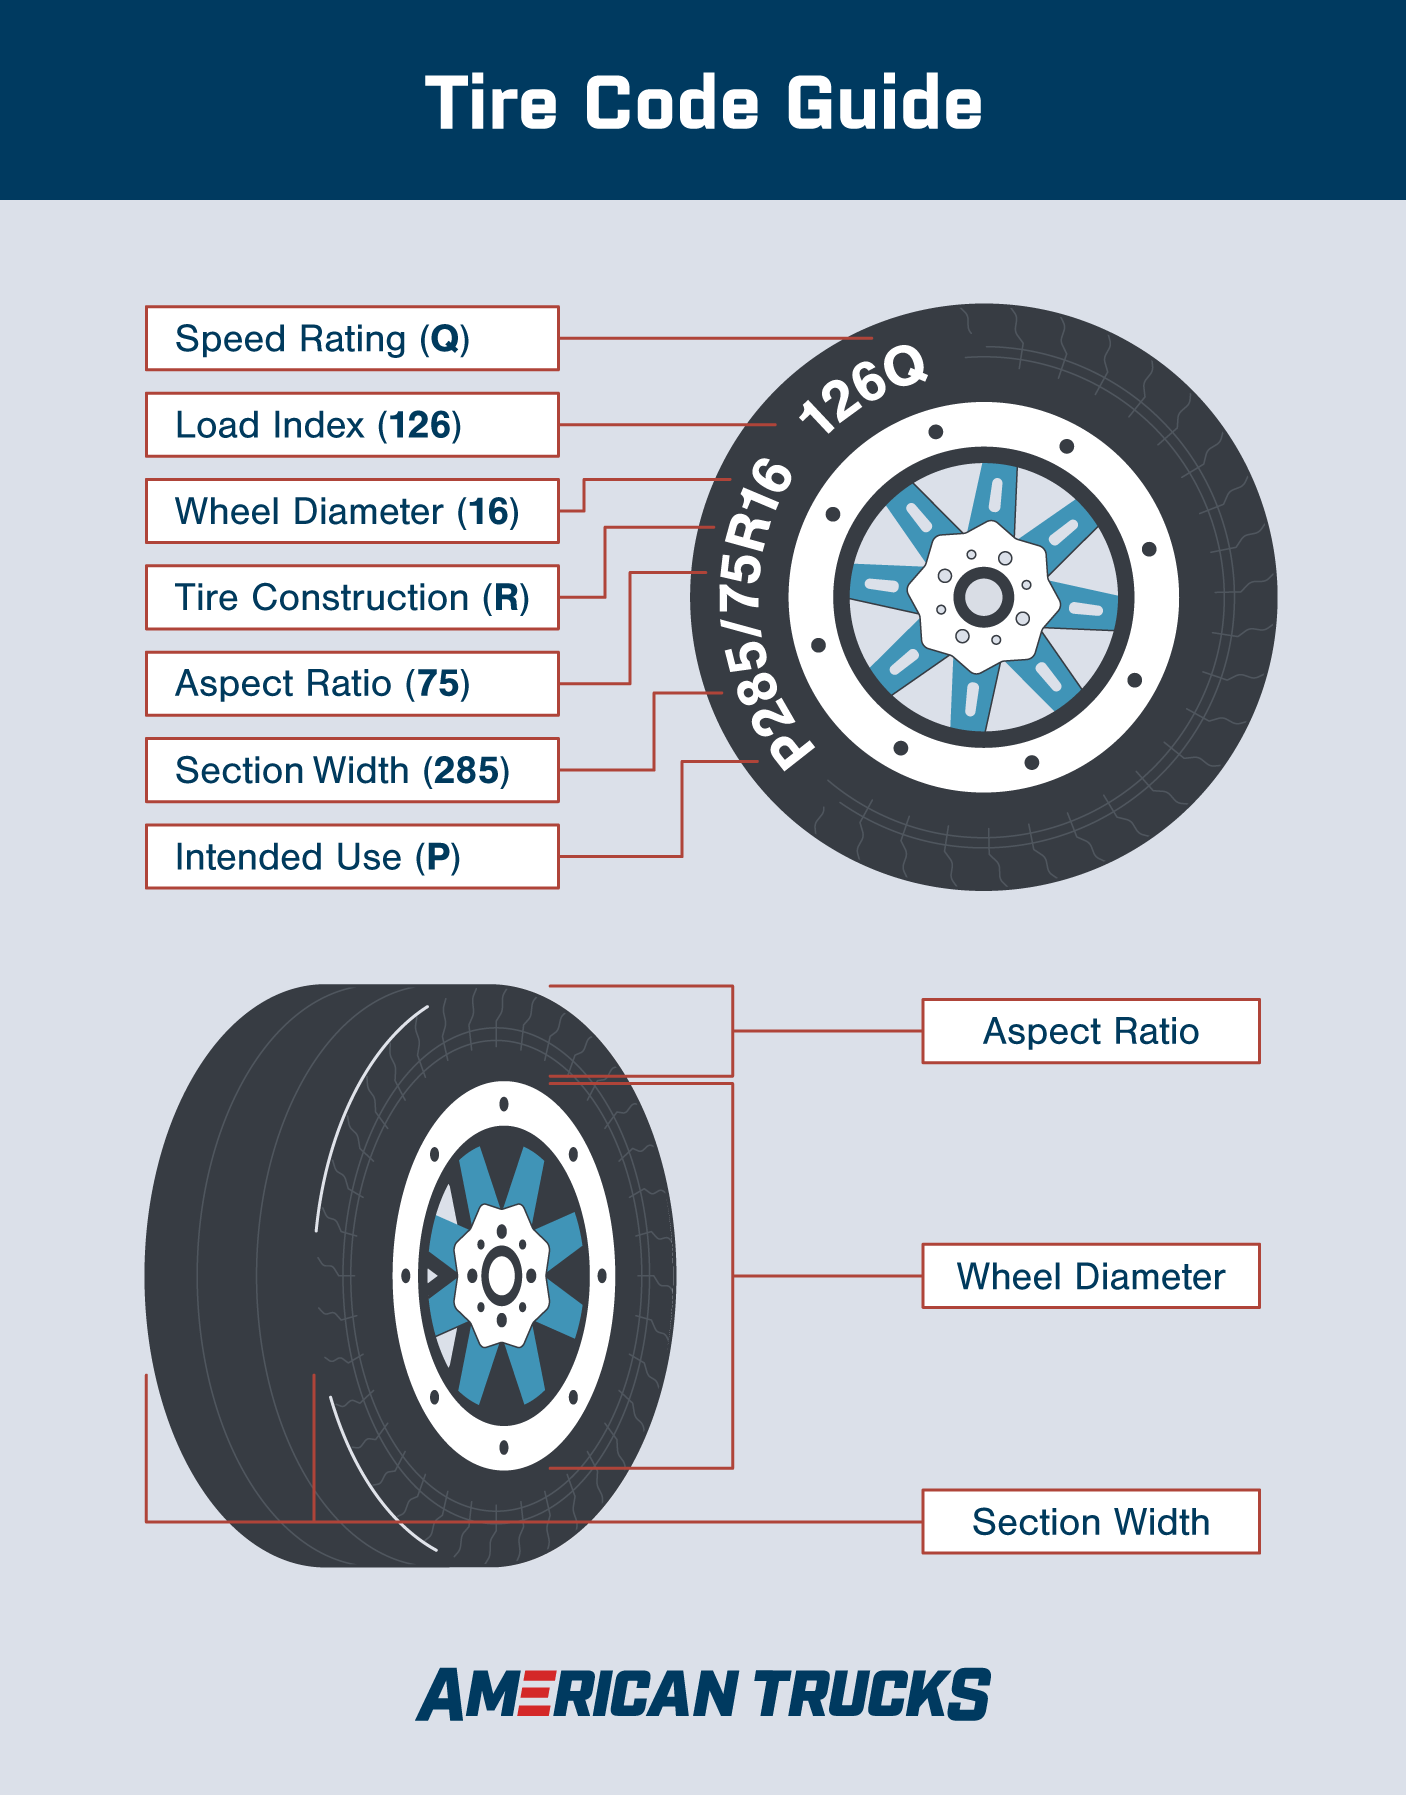 Graphic of tire code guide showing speed rating, load index, wheel diameter, tire construction, aspect ratio, section width, and intended use codes.